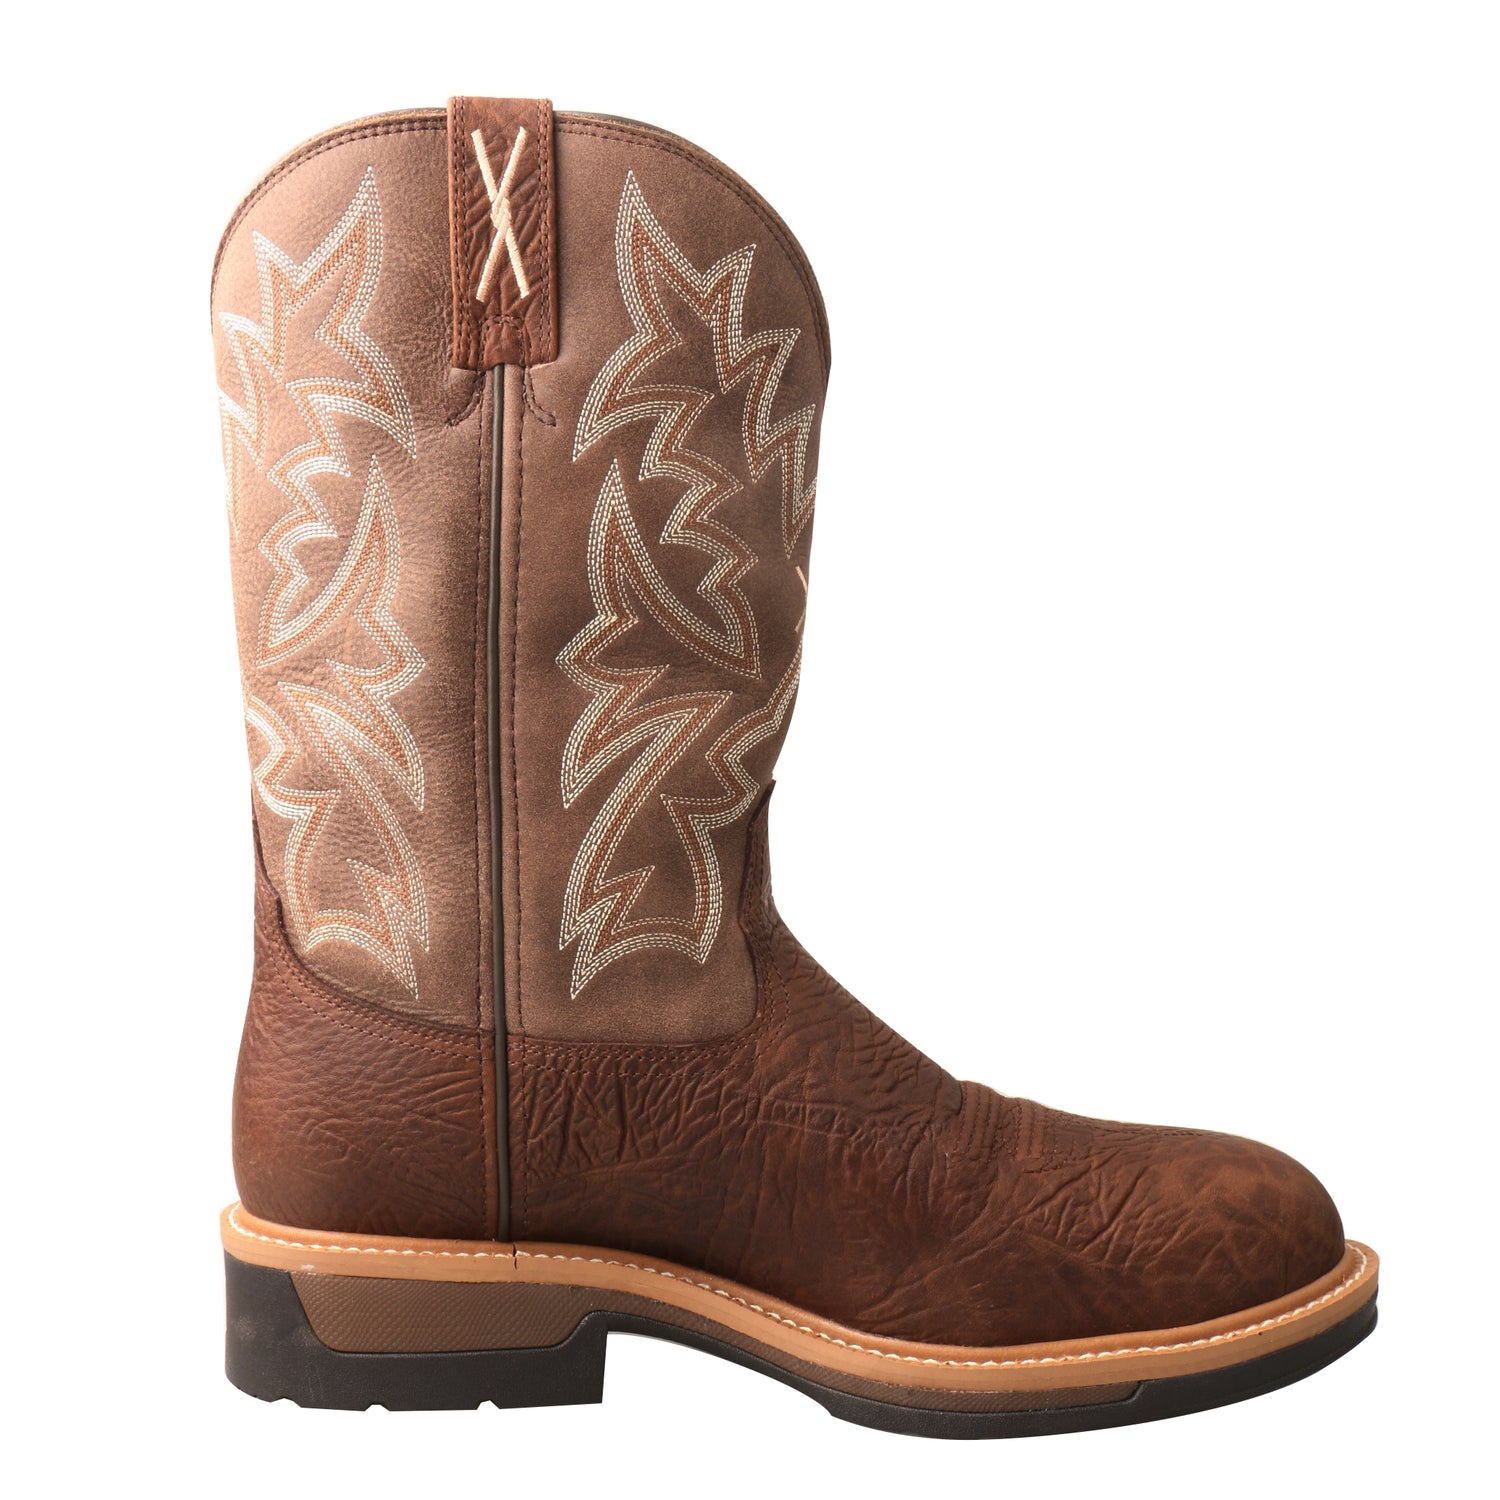 Picture of heel of Men's Twisted X Comp Toe Lite Western Work Boot - WP MLCCW03